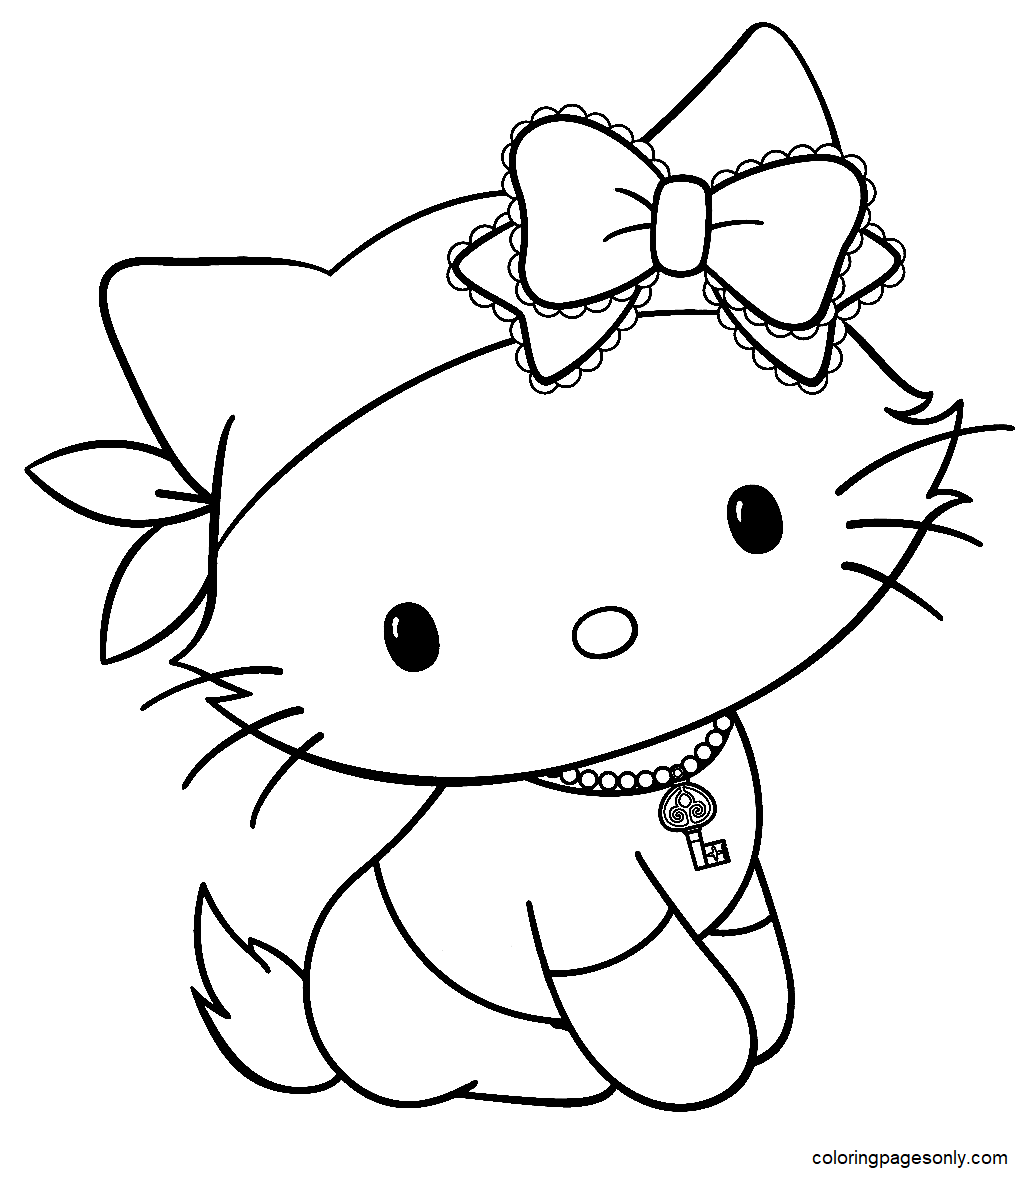 Cute Charmmy Kitty from Charmmy Kitty